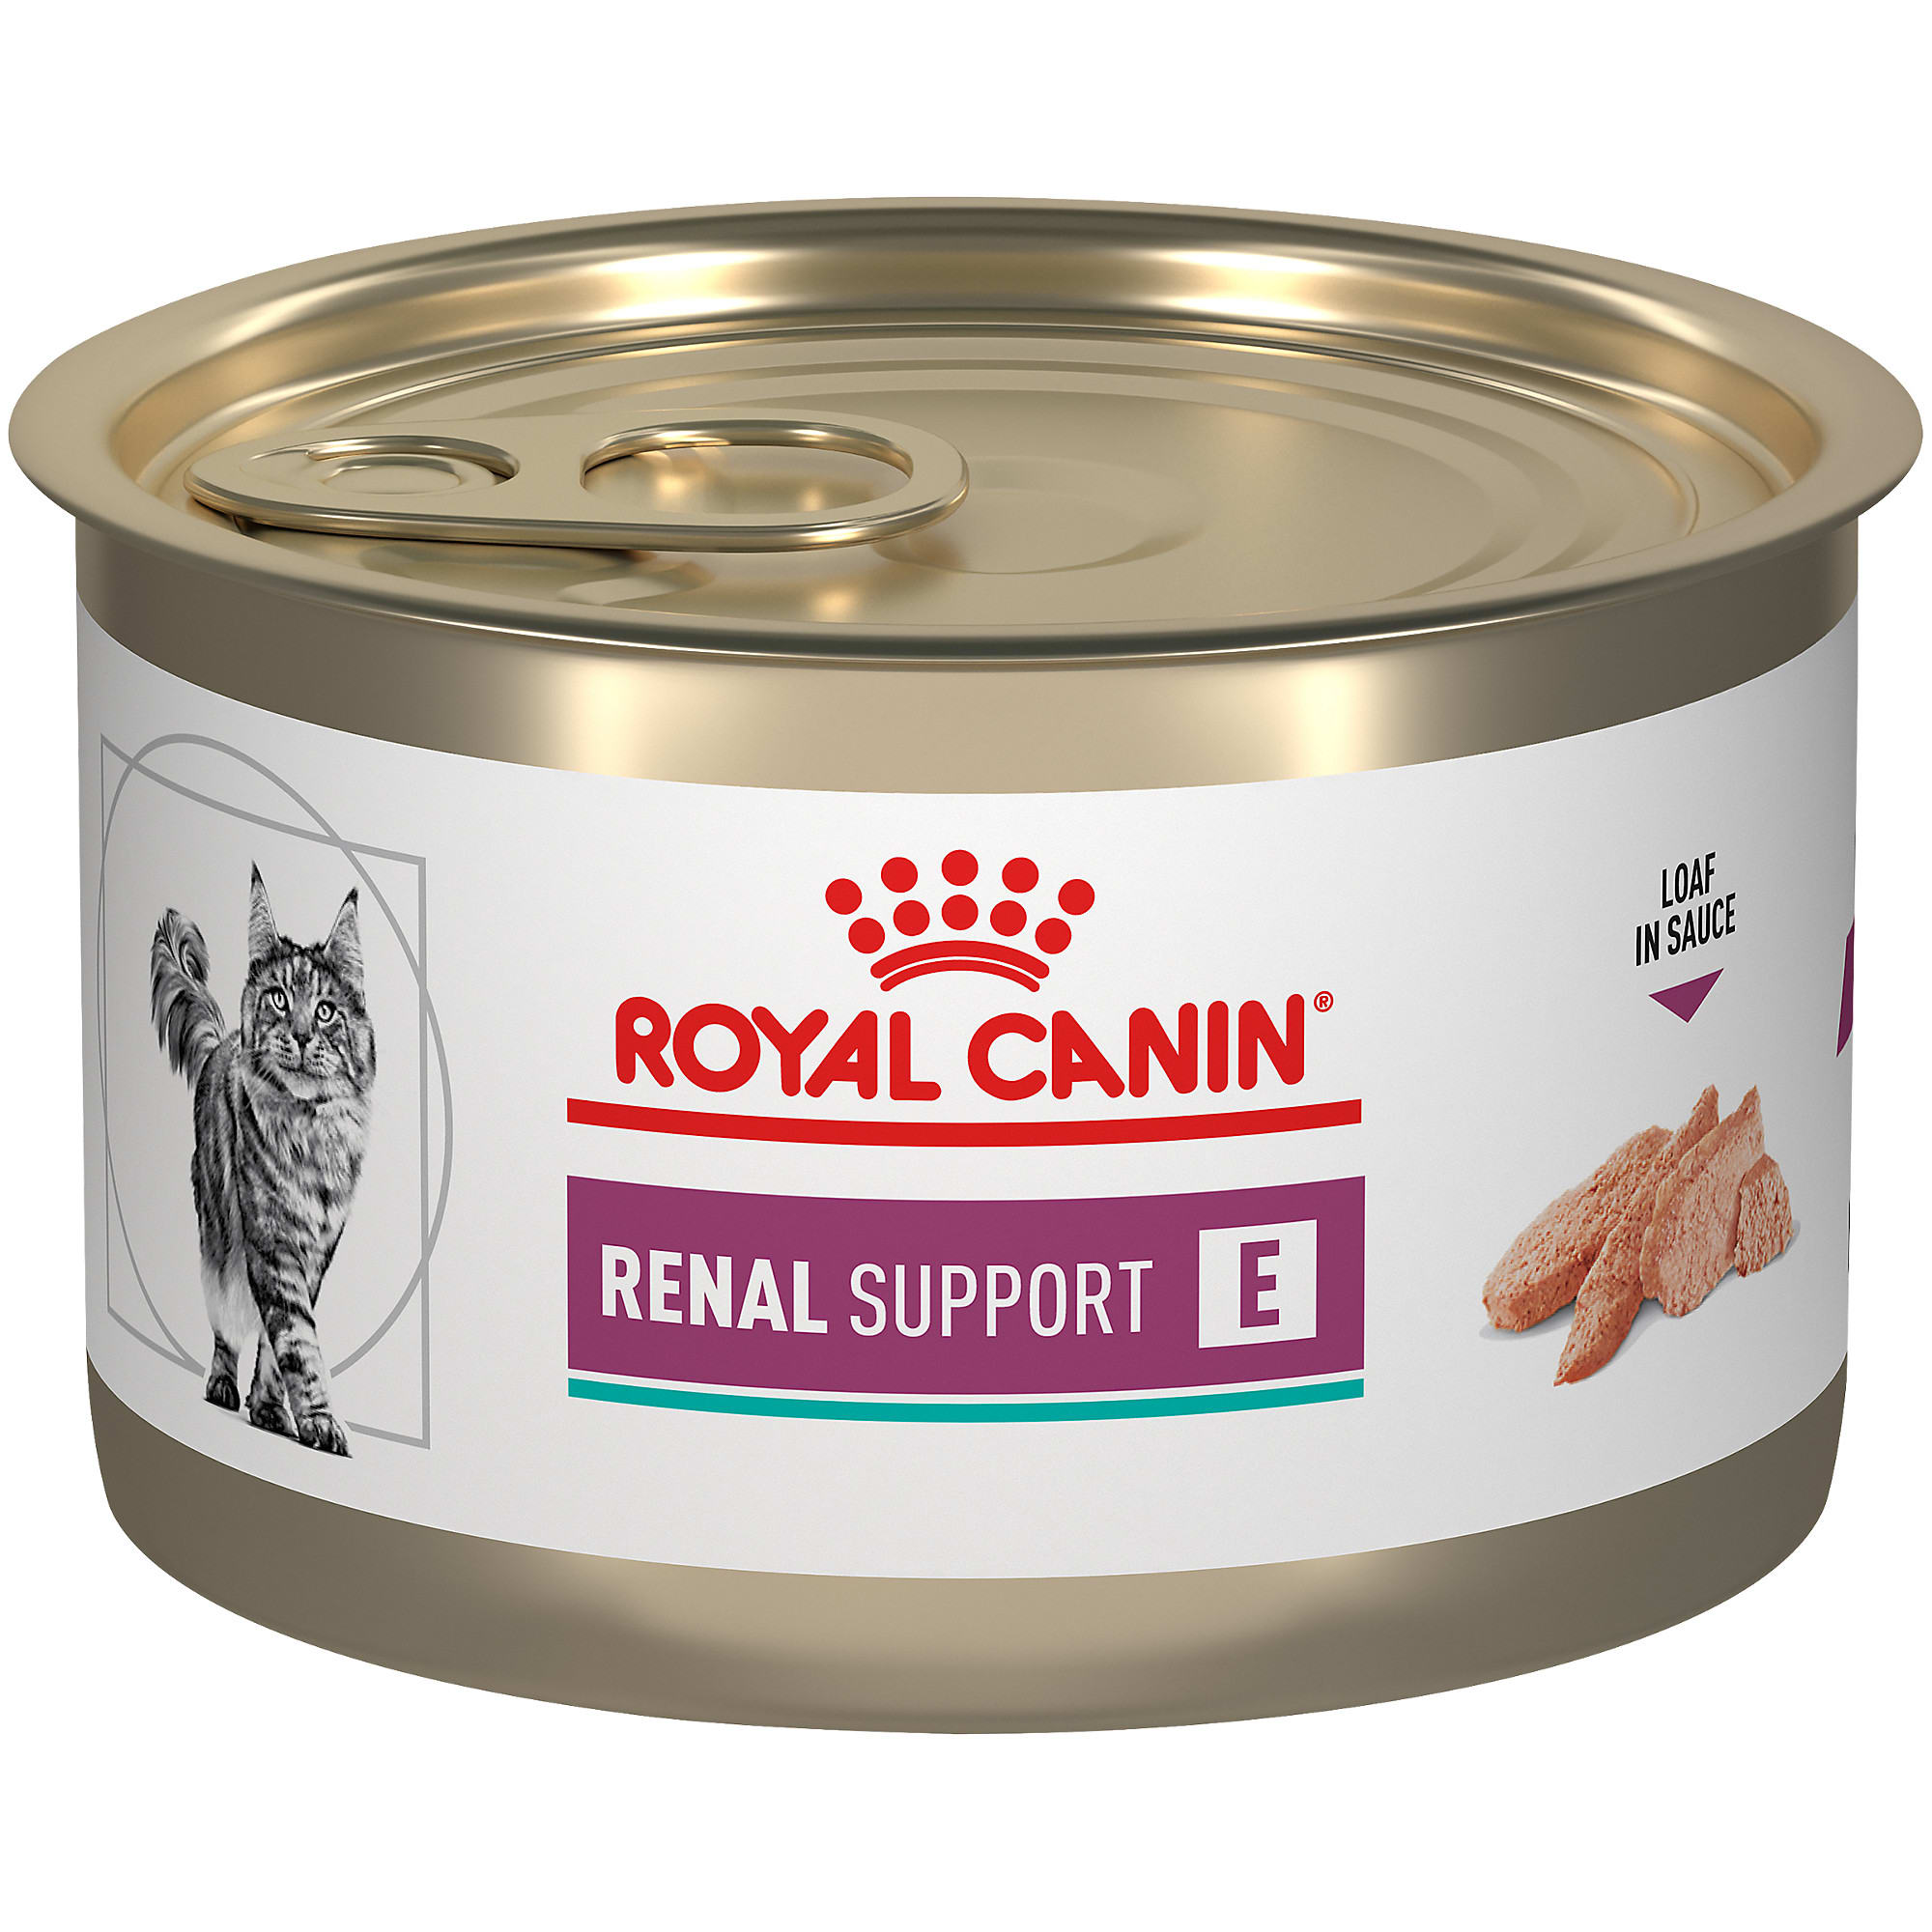 Inzet oosten mengsel Royal Canin Renal Support E (Enticing) Wet Cat Food, 5.1 oz., Case of 24 |  Petco